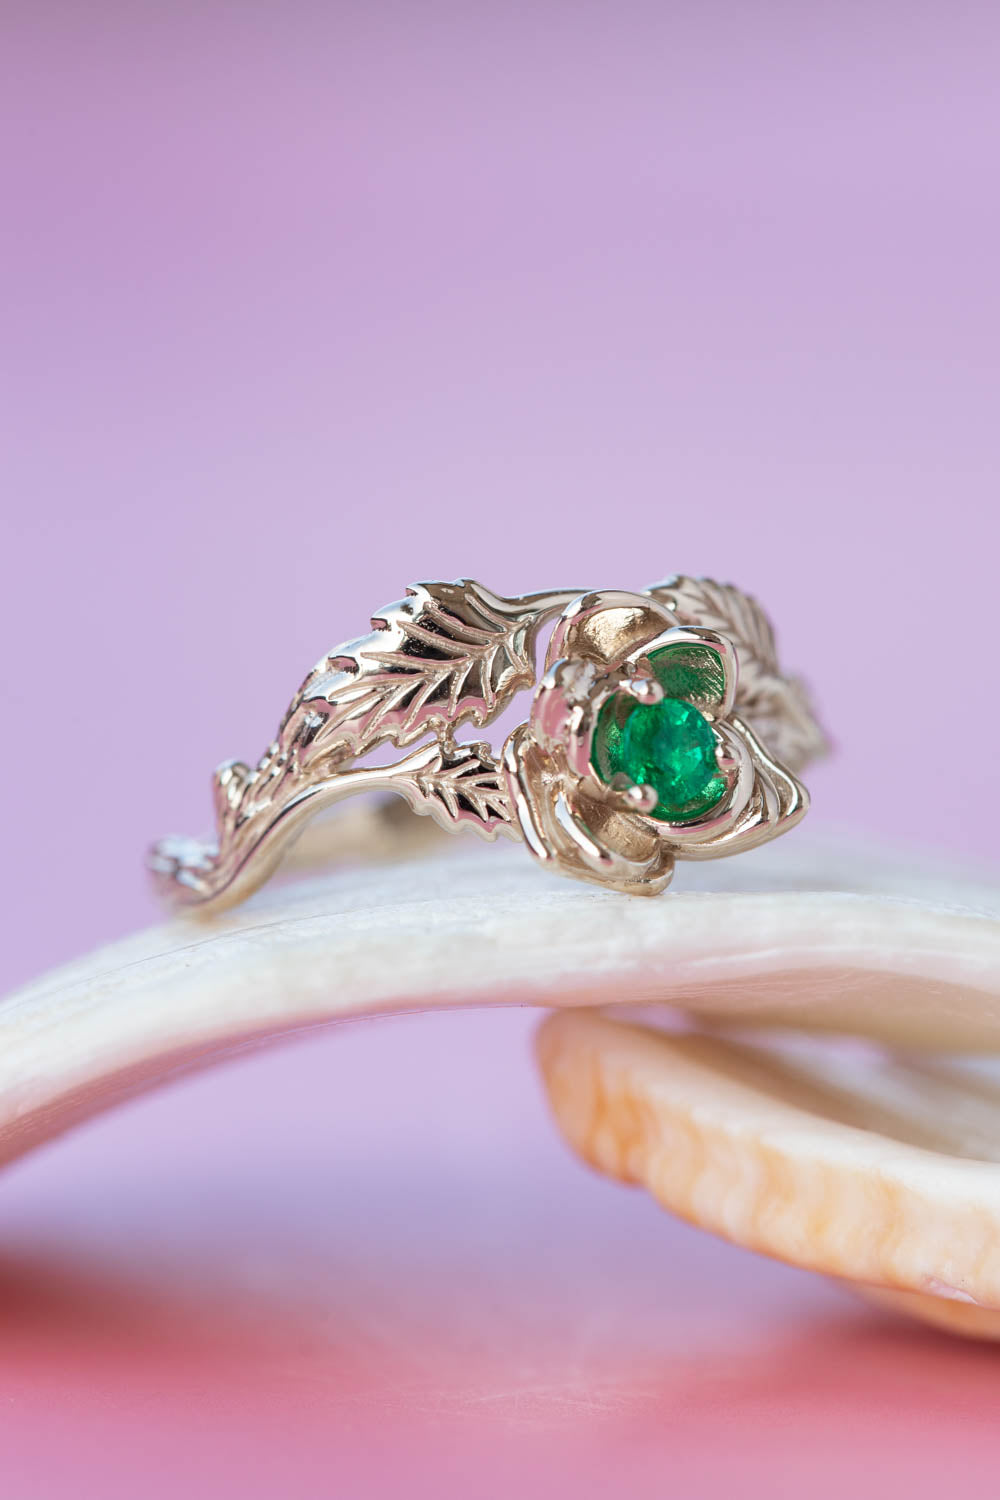 Emerald rose shaped engagement ring, white gold flower proposal ring / Blooming Rose - Eden Garden Jewelry™